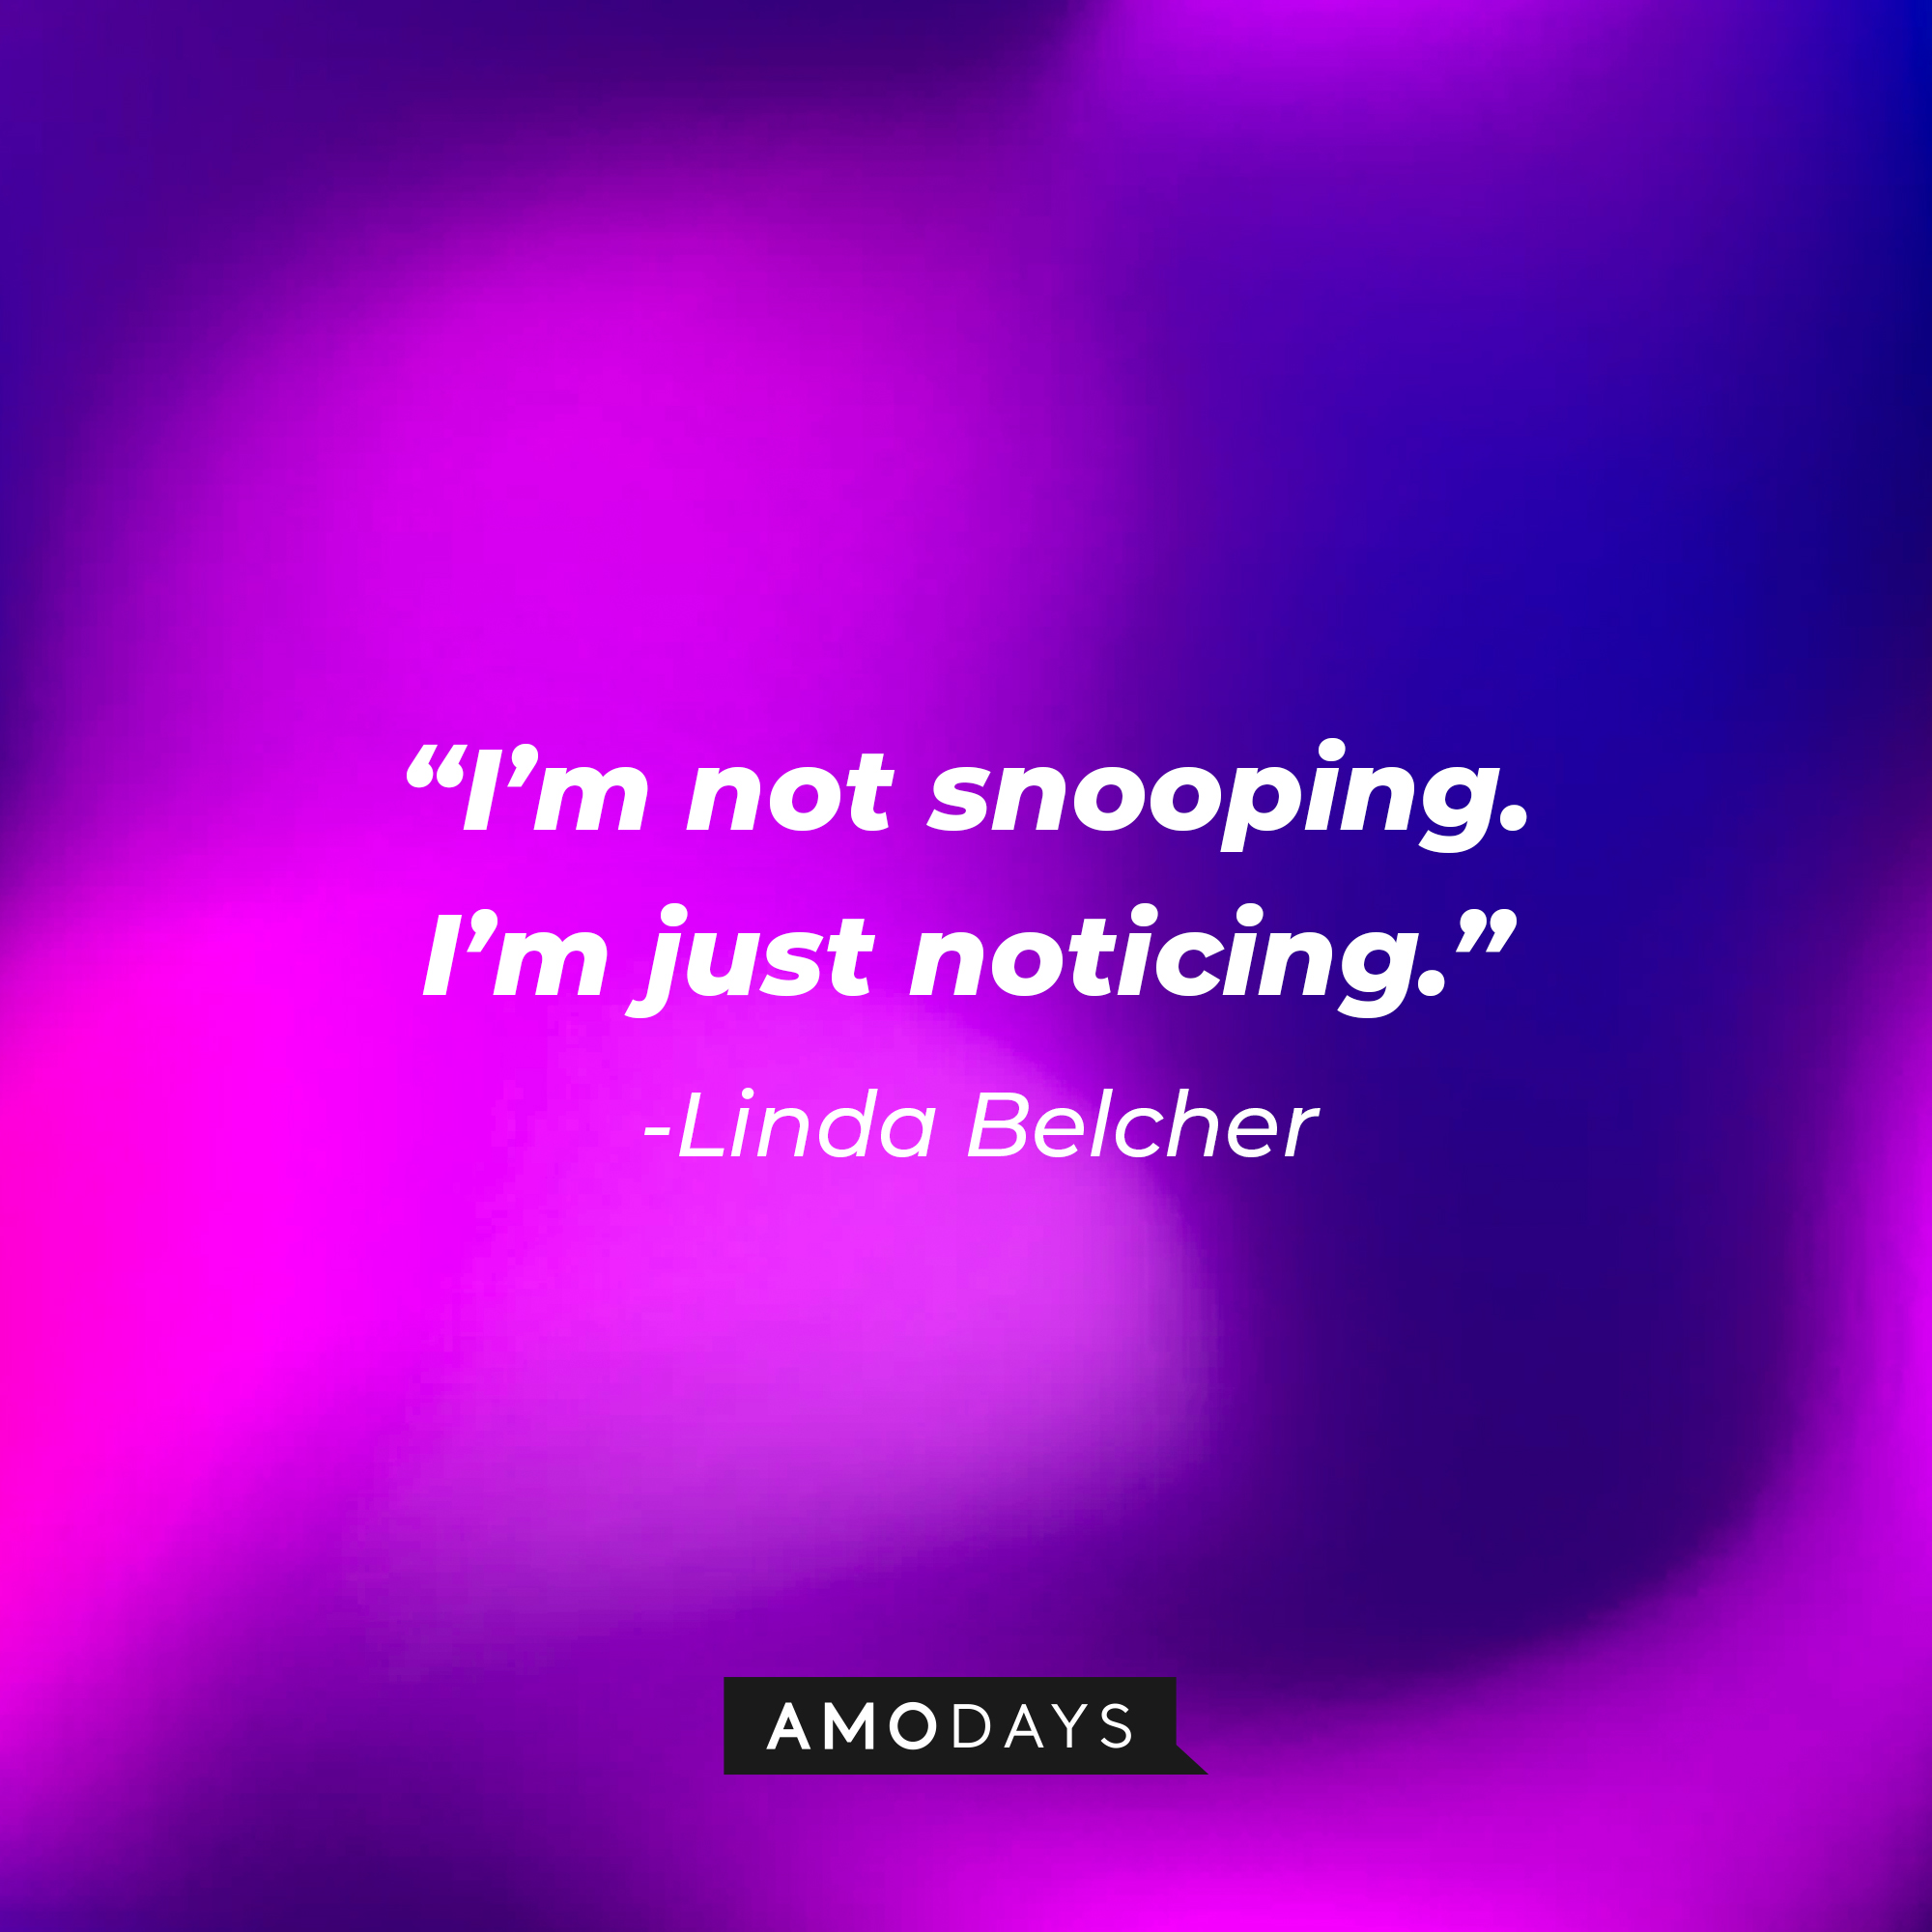 Linda Belcher’s quote: “I’m not snooping. I’m just noticing.”  | Source: AmoDays